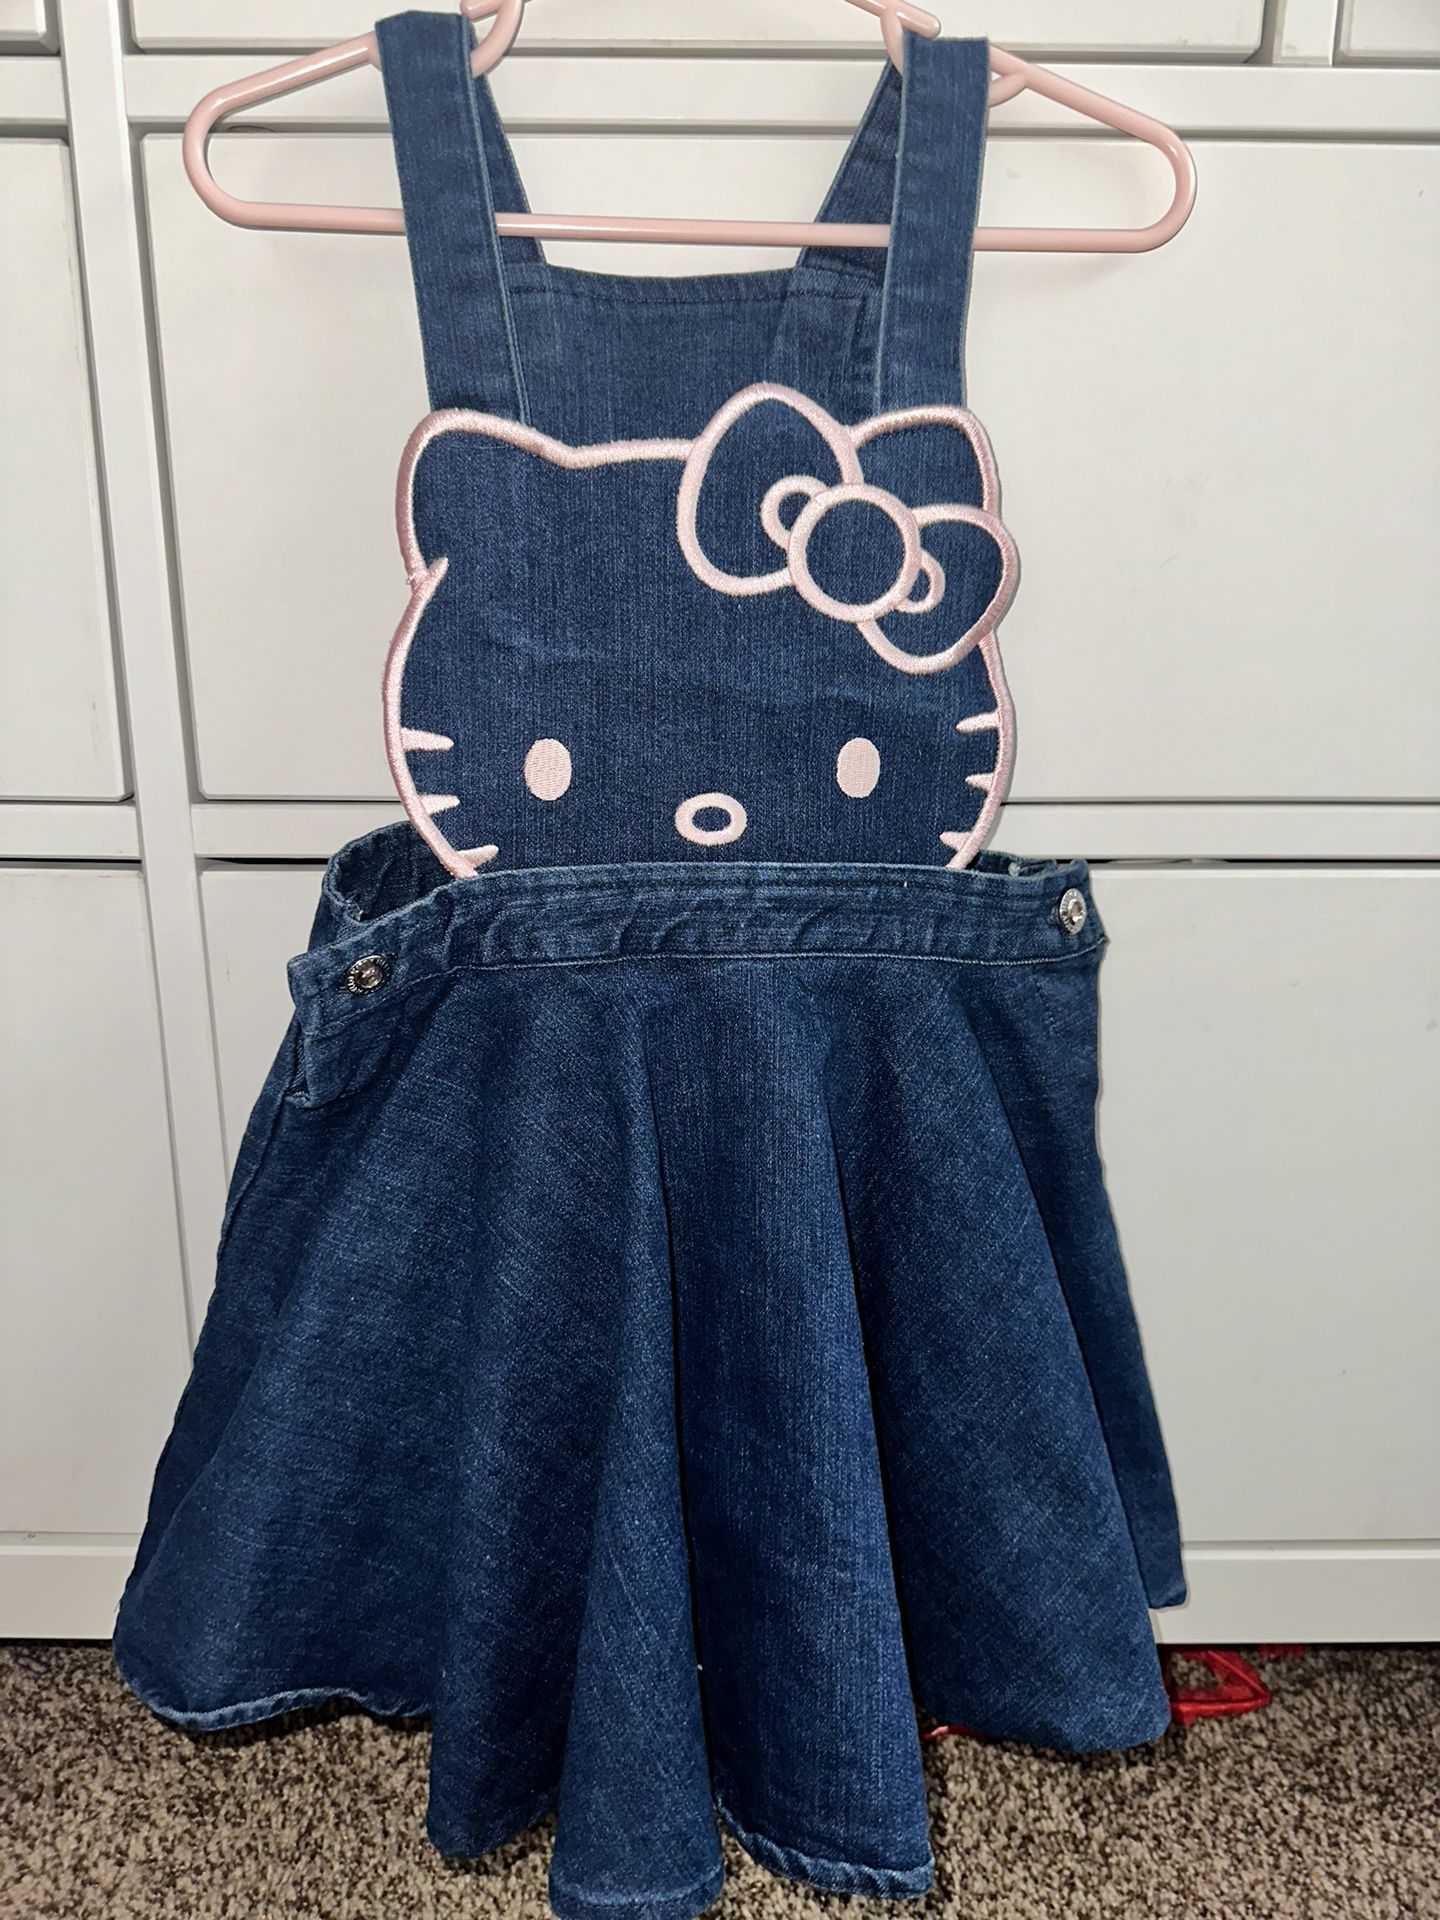 Hello Kitty Overall Dress Toddler Size: 4 